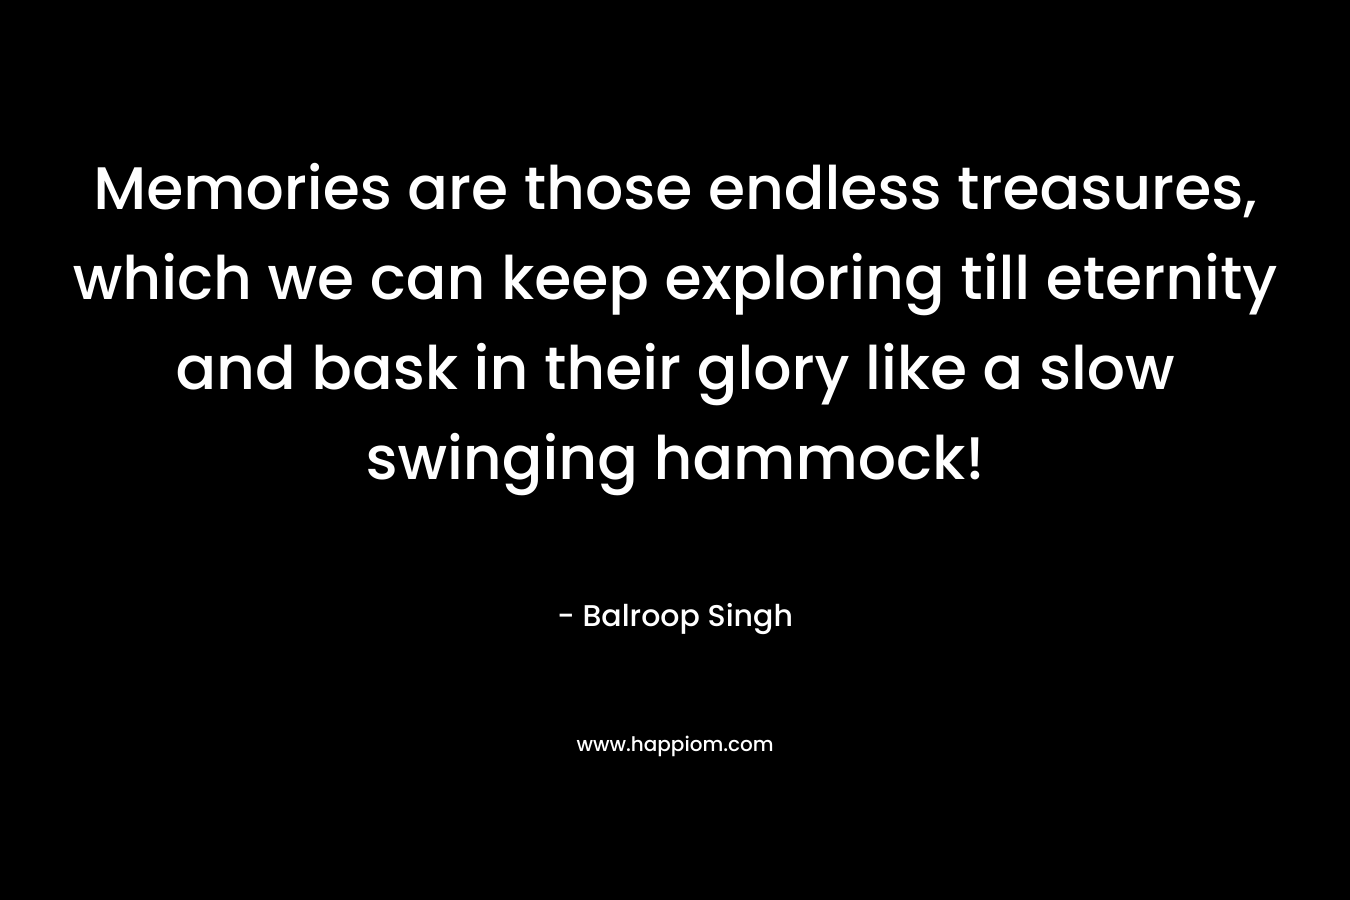 Memories are those endless treasures, which we can keep exploring till eternity and bask in their glory like a slow swinging hammock! – Balroop Singh